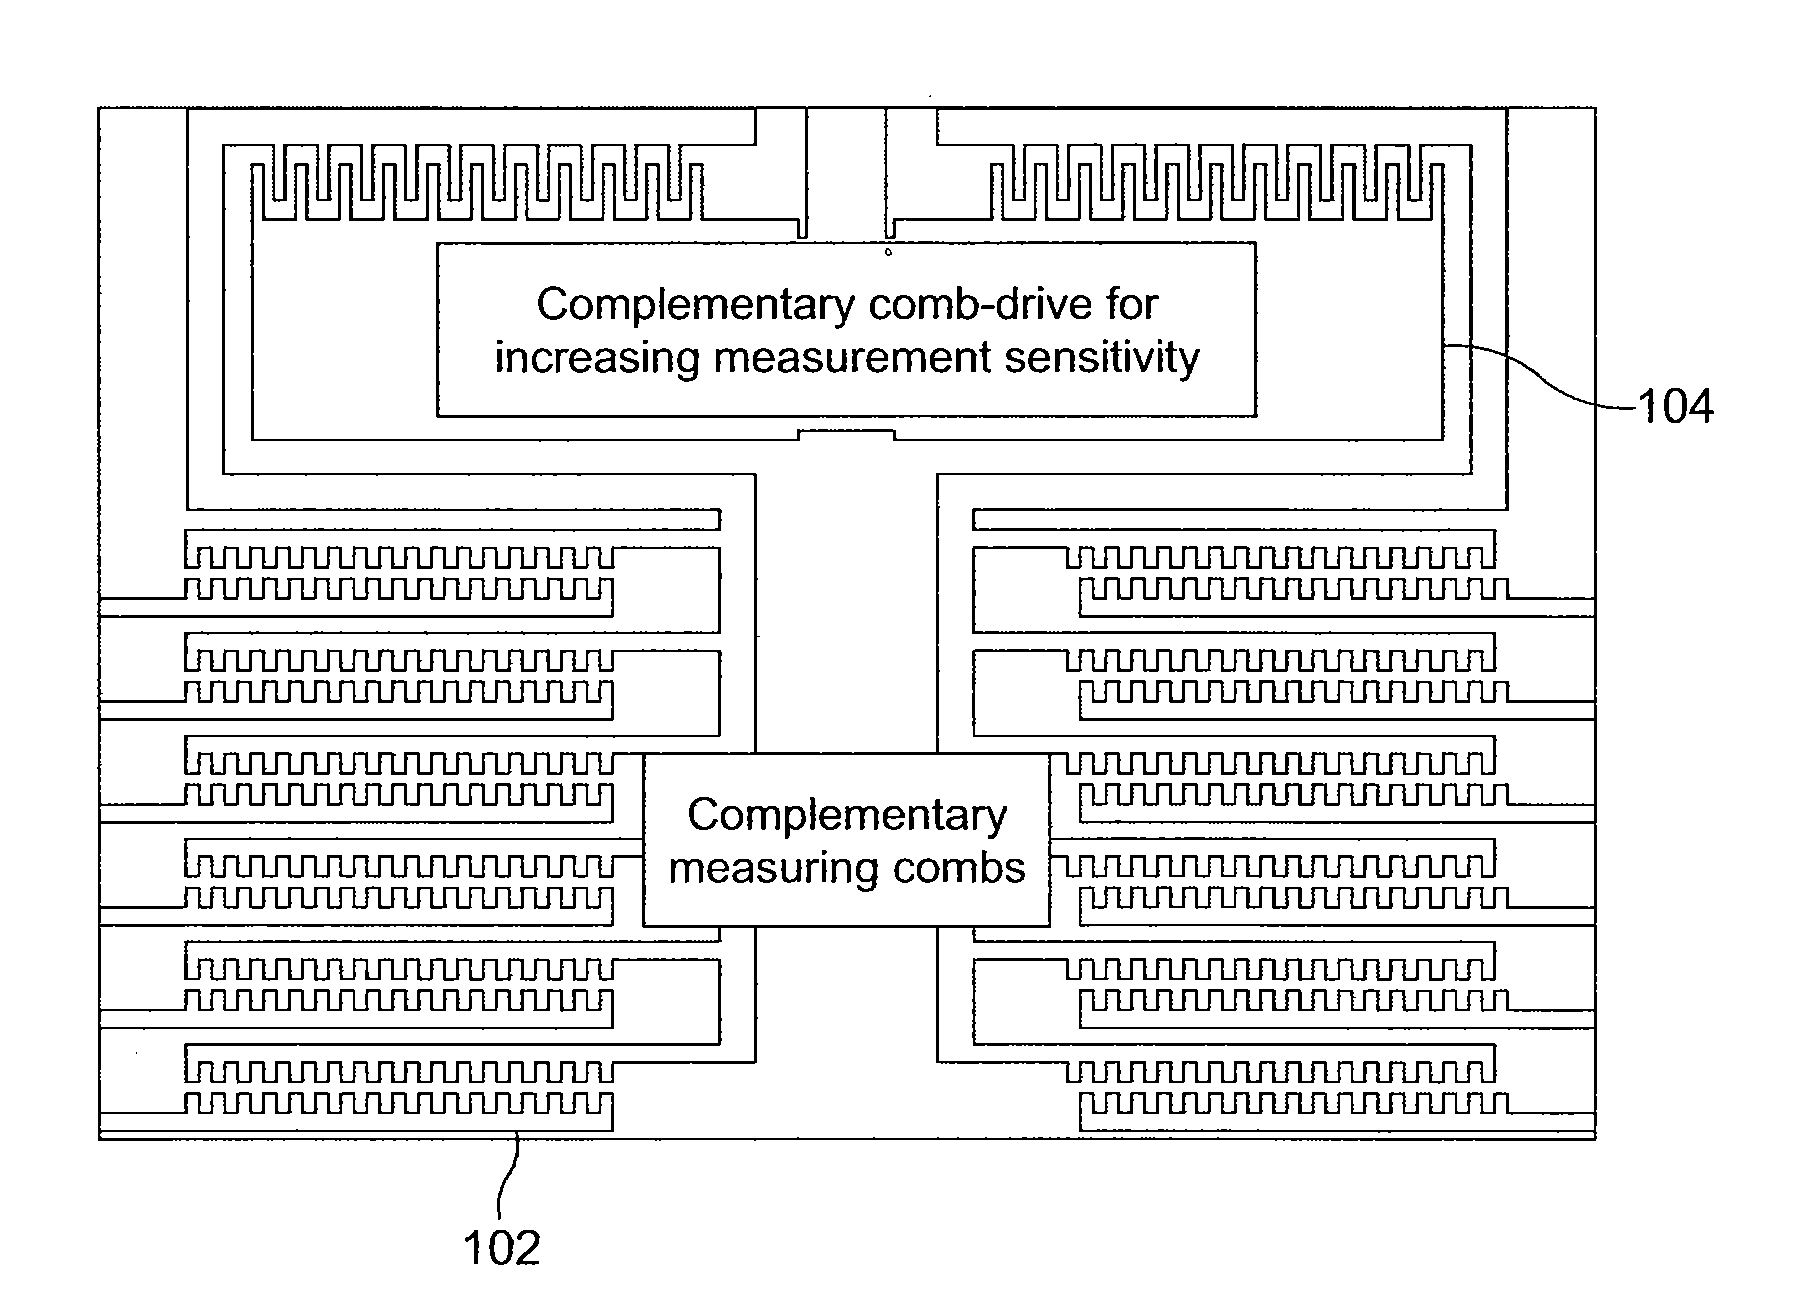 Integrated MEMS metrology device using complementary measuring combs